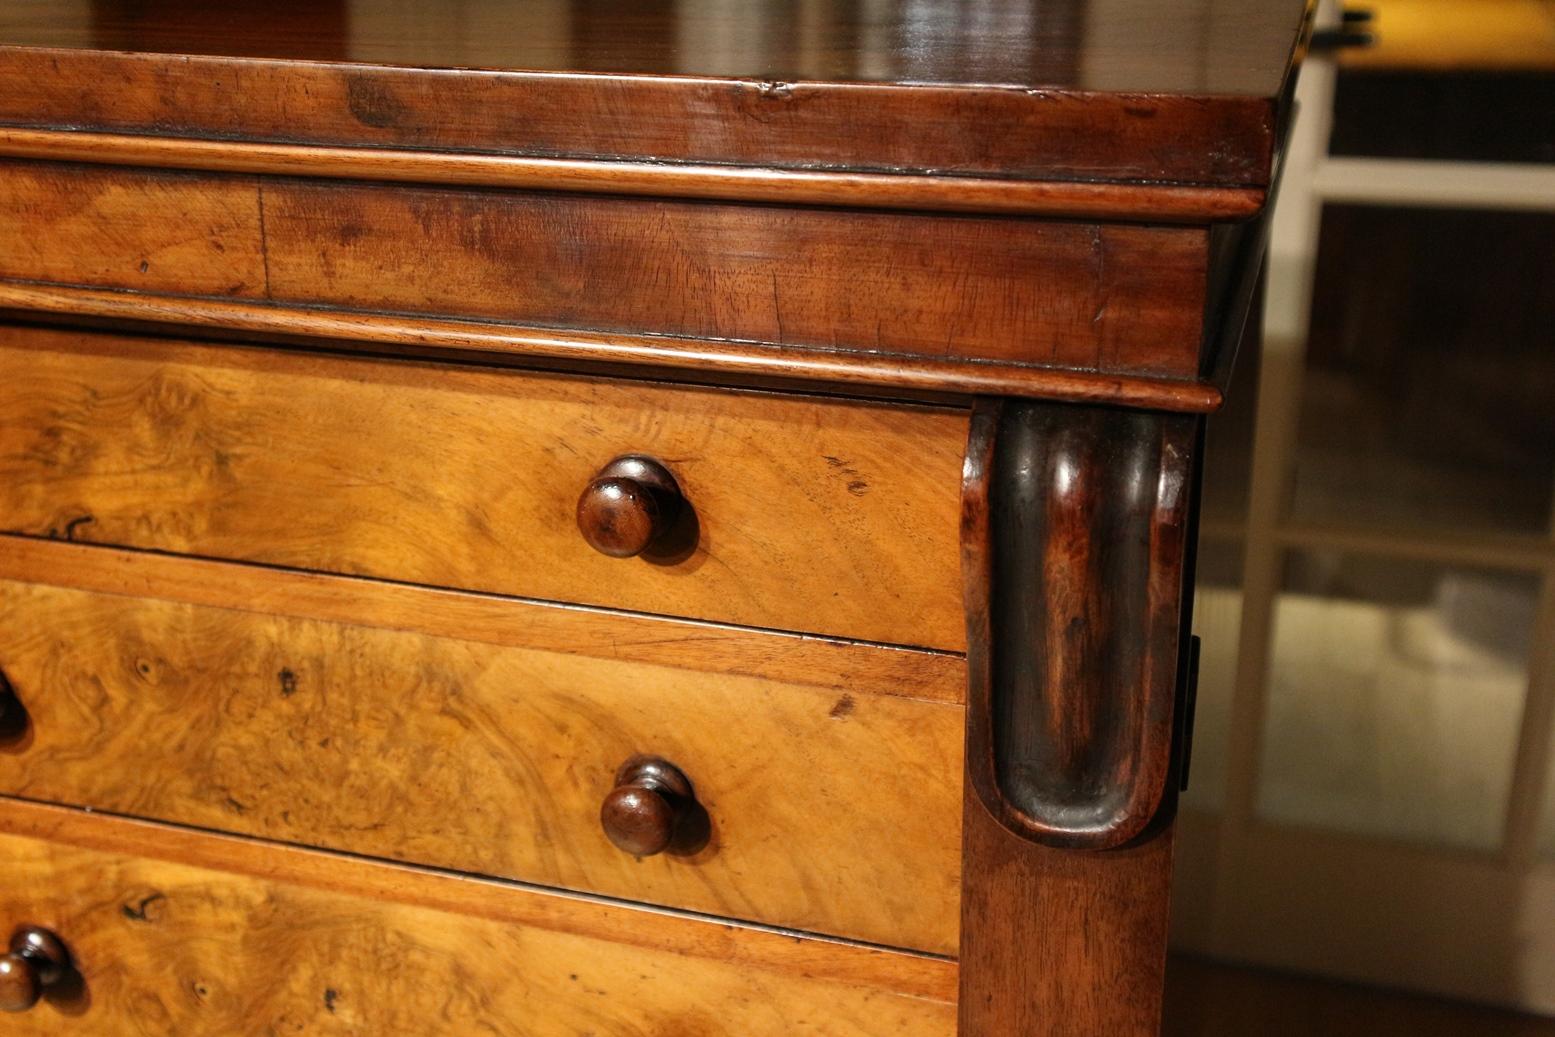 Beautiful wellington chest of drawers in walnut with 7 drawers increasing in depth. In good and completely original condition. Beautiful patina.
Origin: England
Period: Approx. 1840
Size: W. 59cm, D. 37cm, H. 125cm.